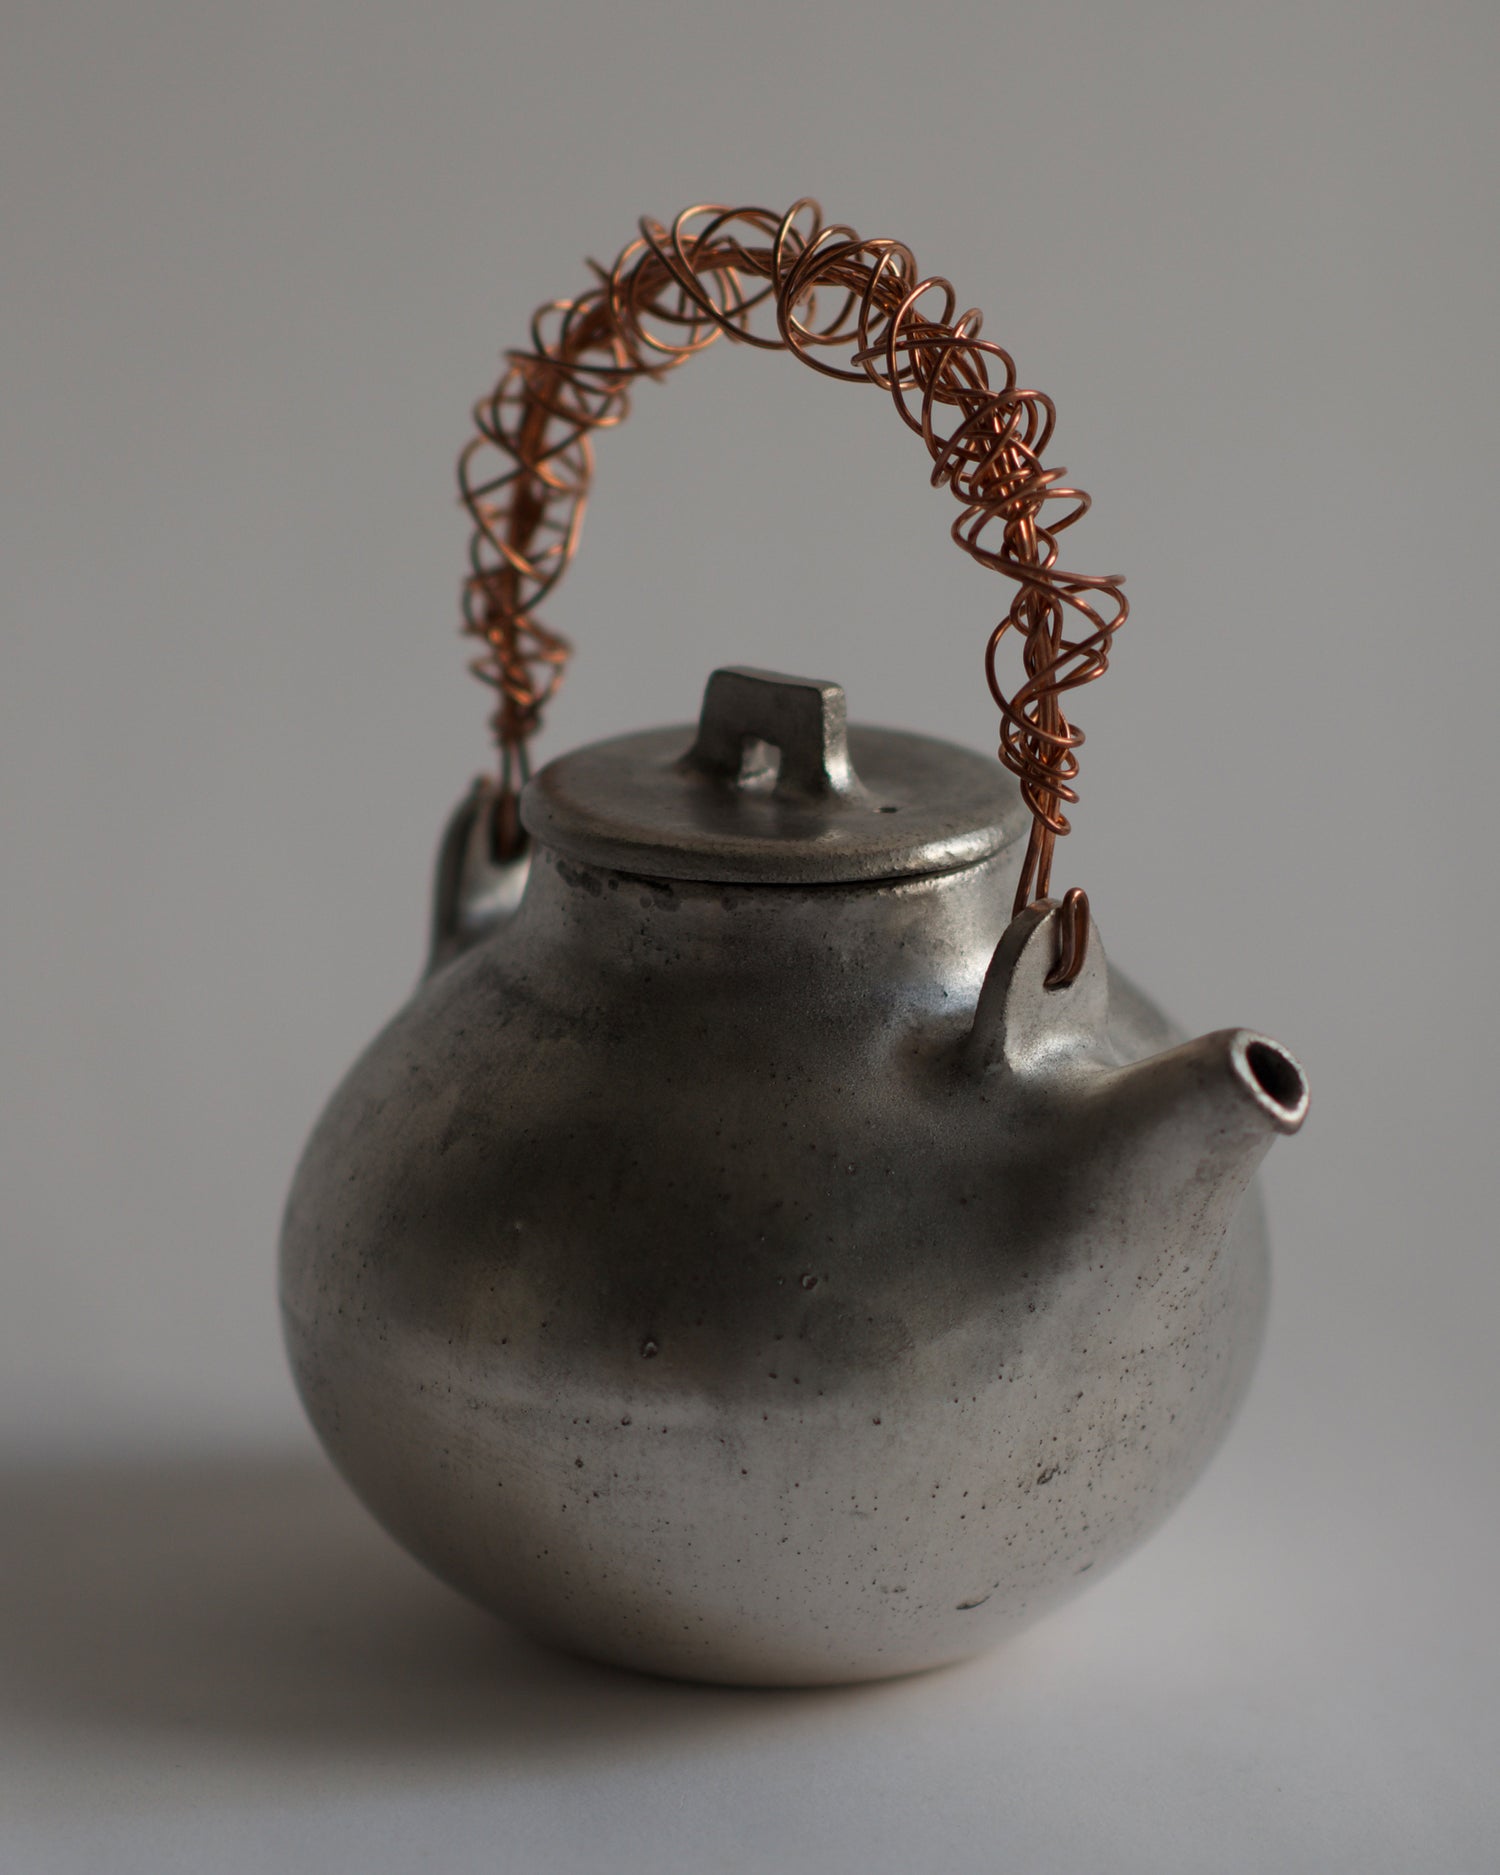 Angled image of small ceramic teapot with sterling silver overglaze and twisted copper wire handle by Masanobu Ando against white-gray background.